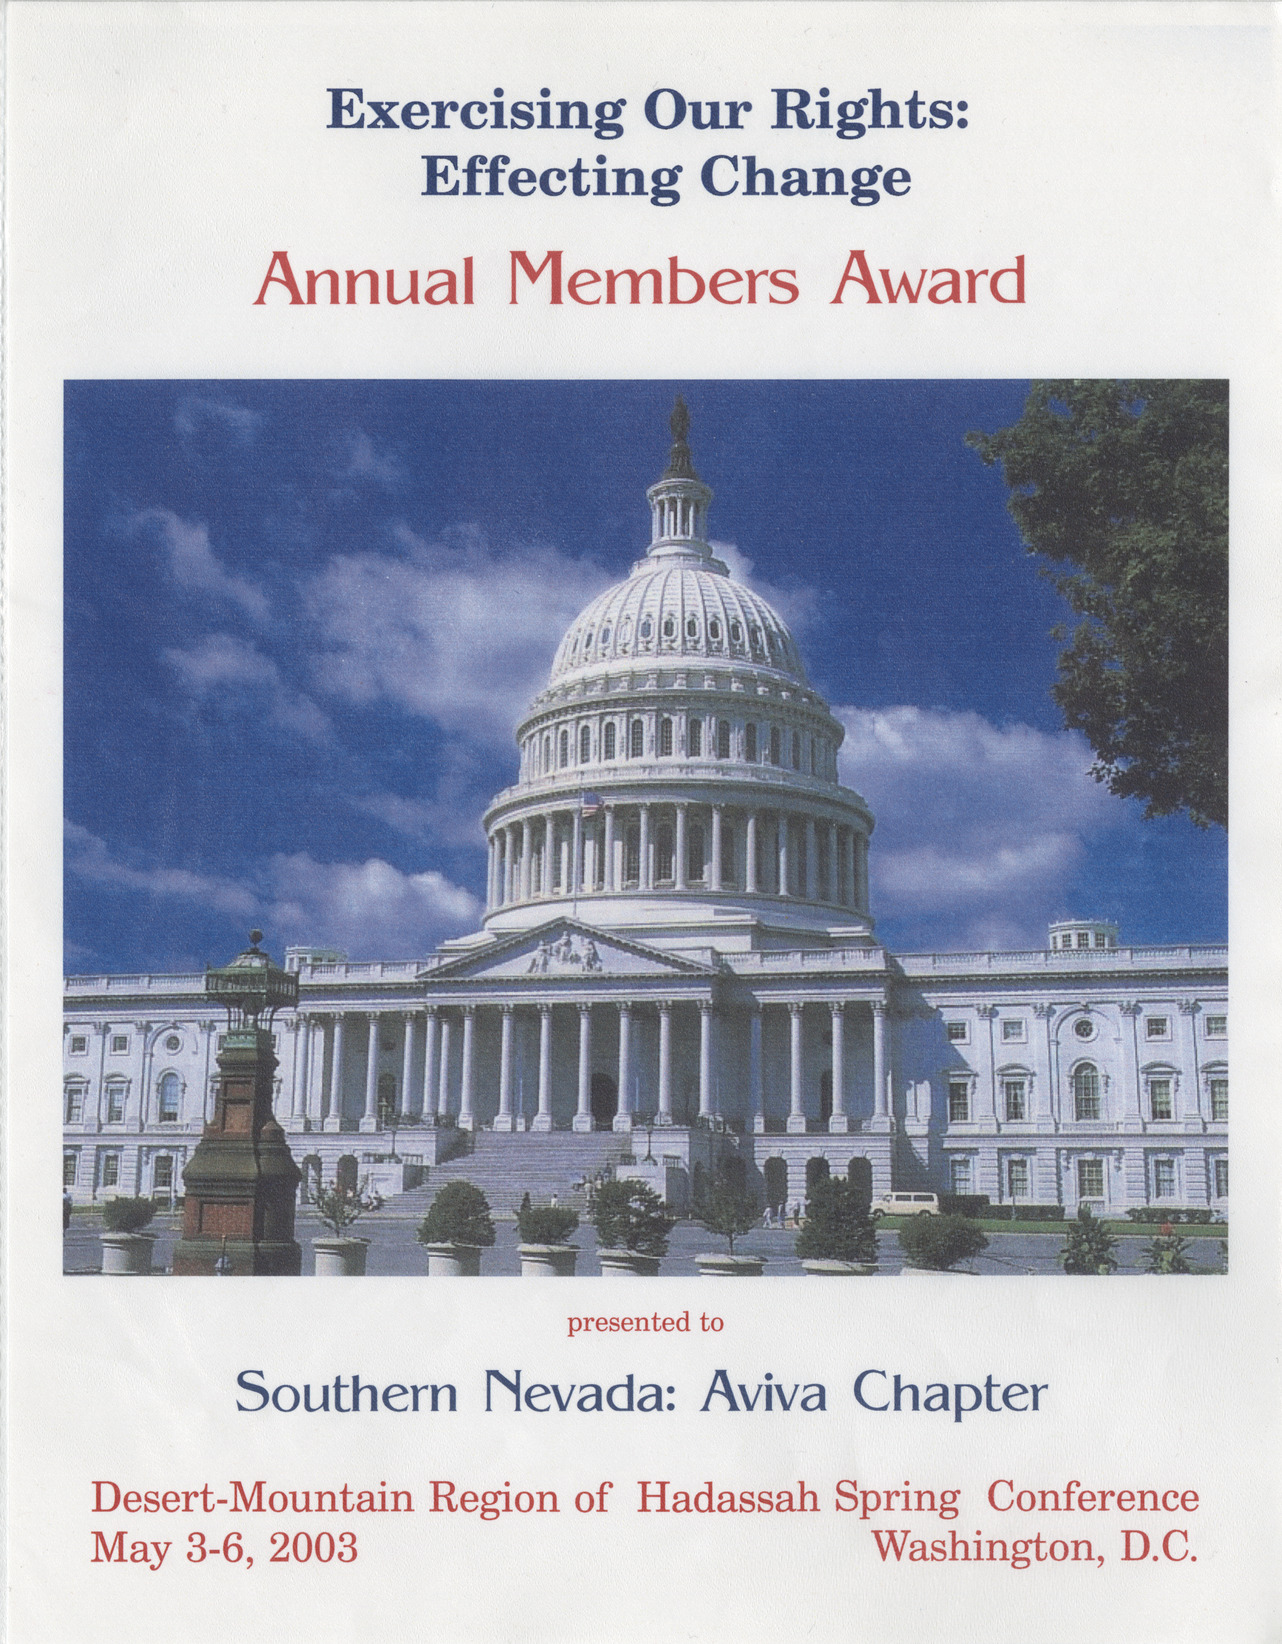 Annual members award for Southern Nevada Aviva Chapter, May 2003